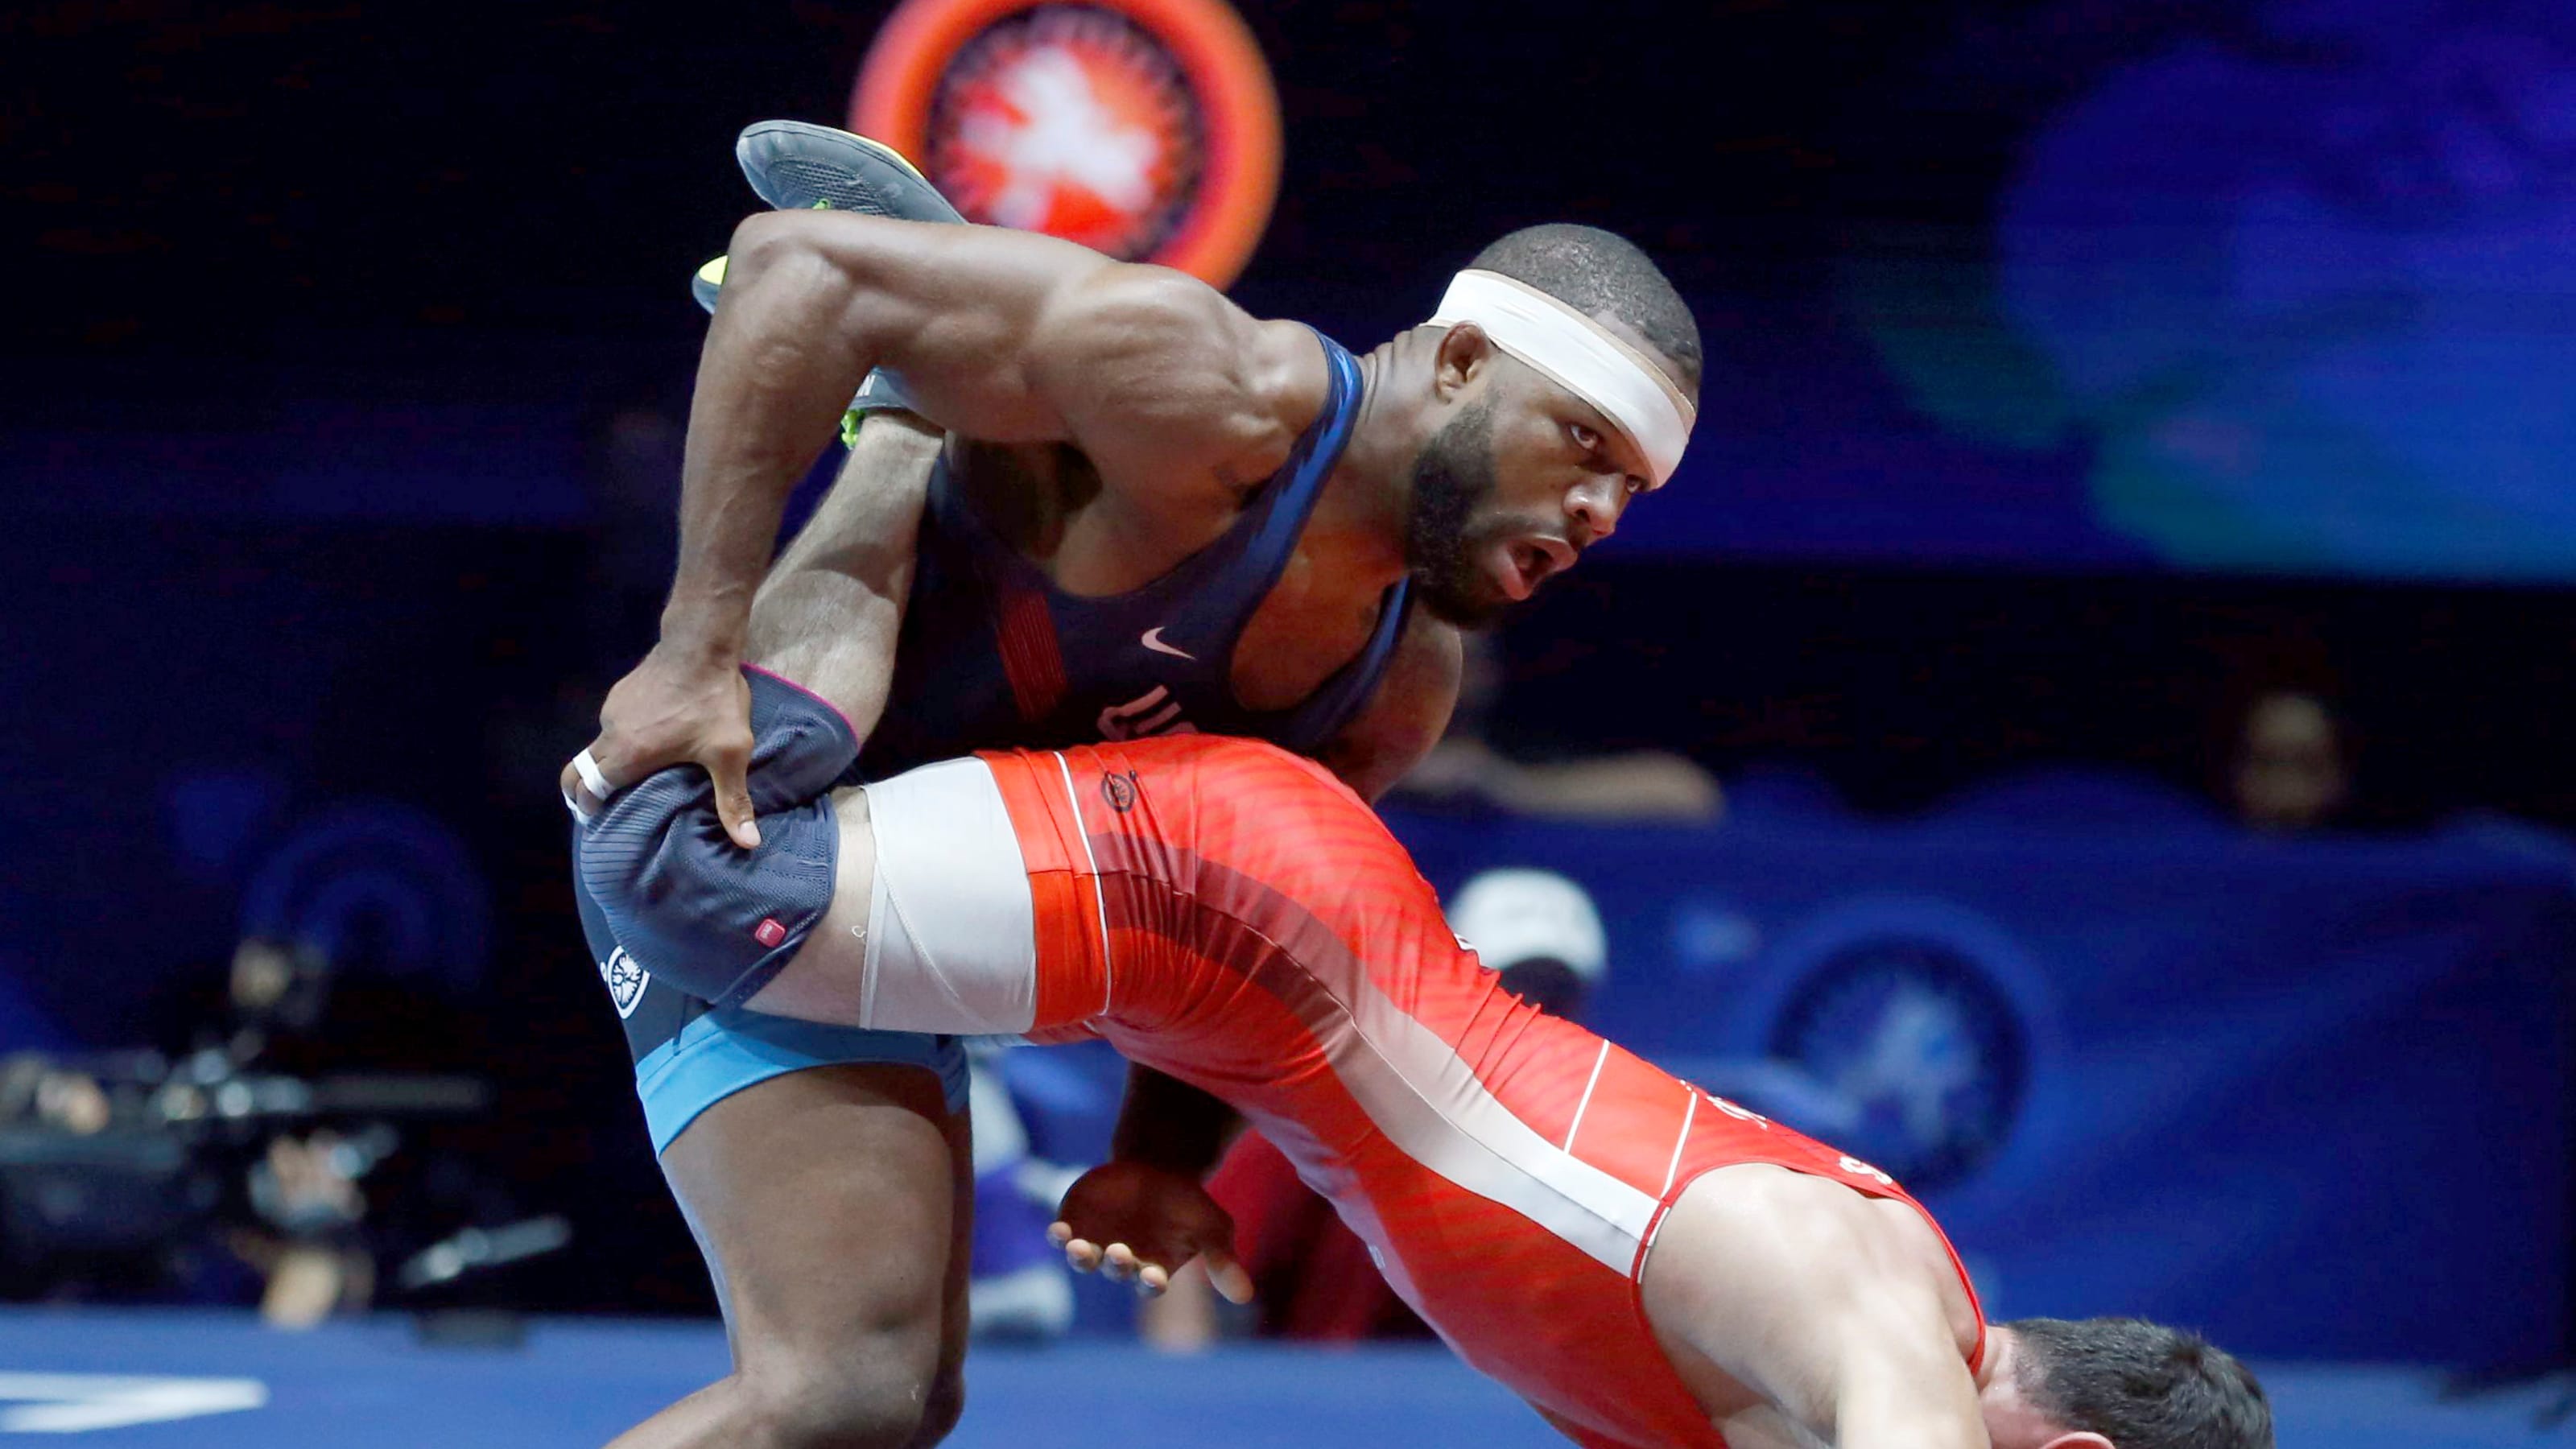 Jordan Burroughs aims to join wrestling greats in Budapest